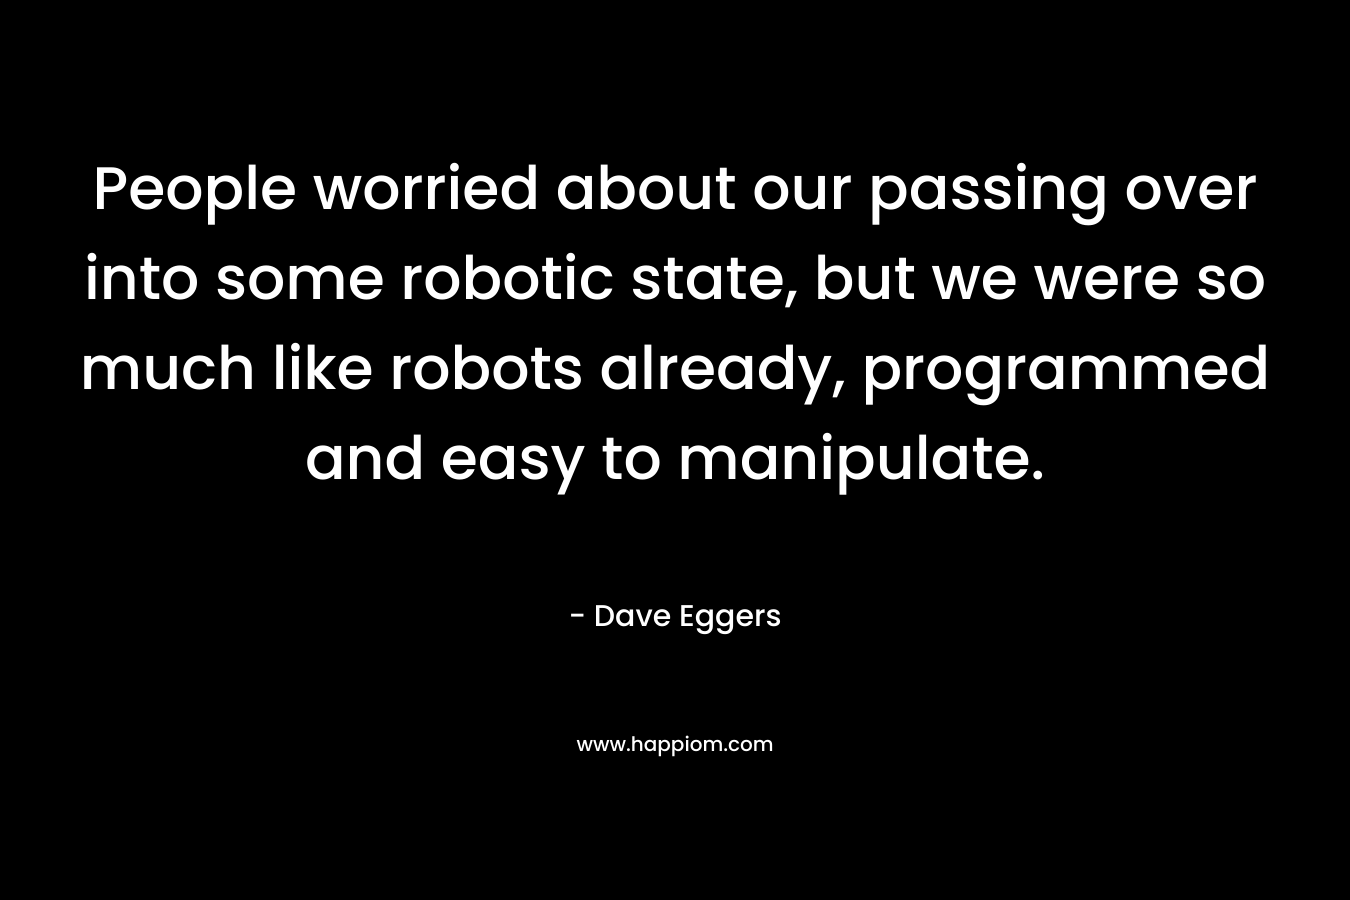 People worried about our passing over into some robotic state, but we were so much like robots already, programmed and easy to manipulate.